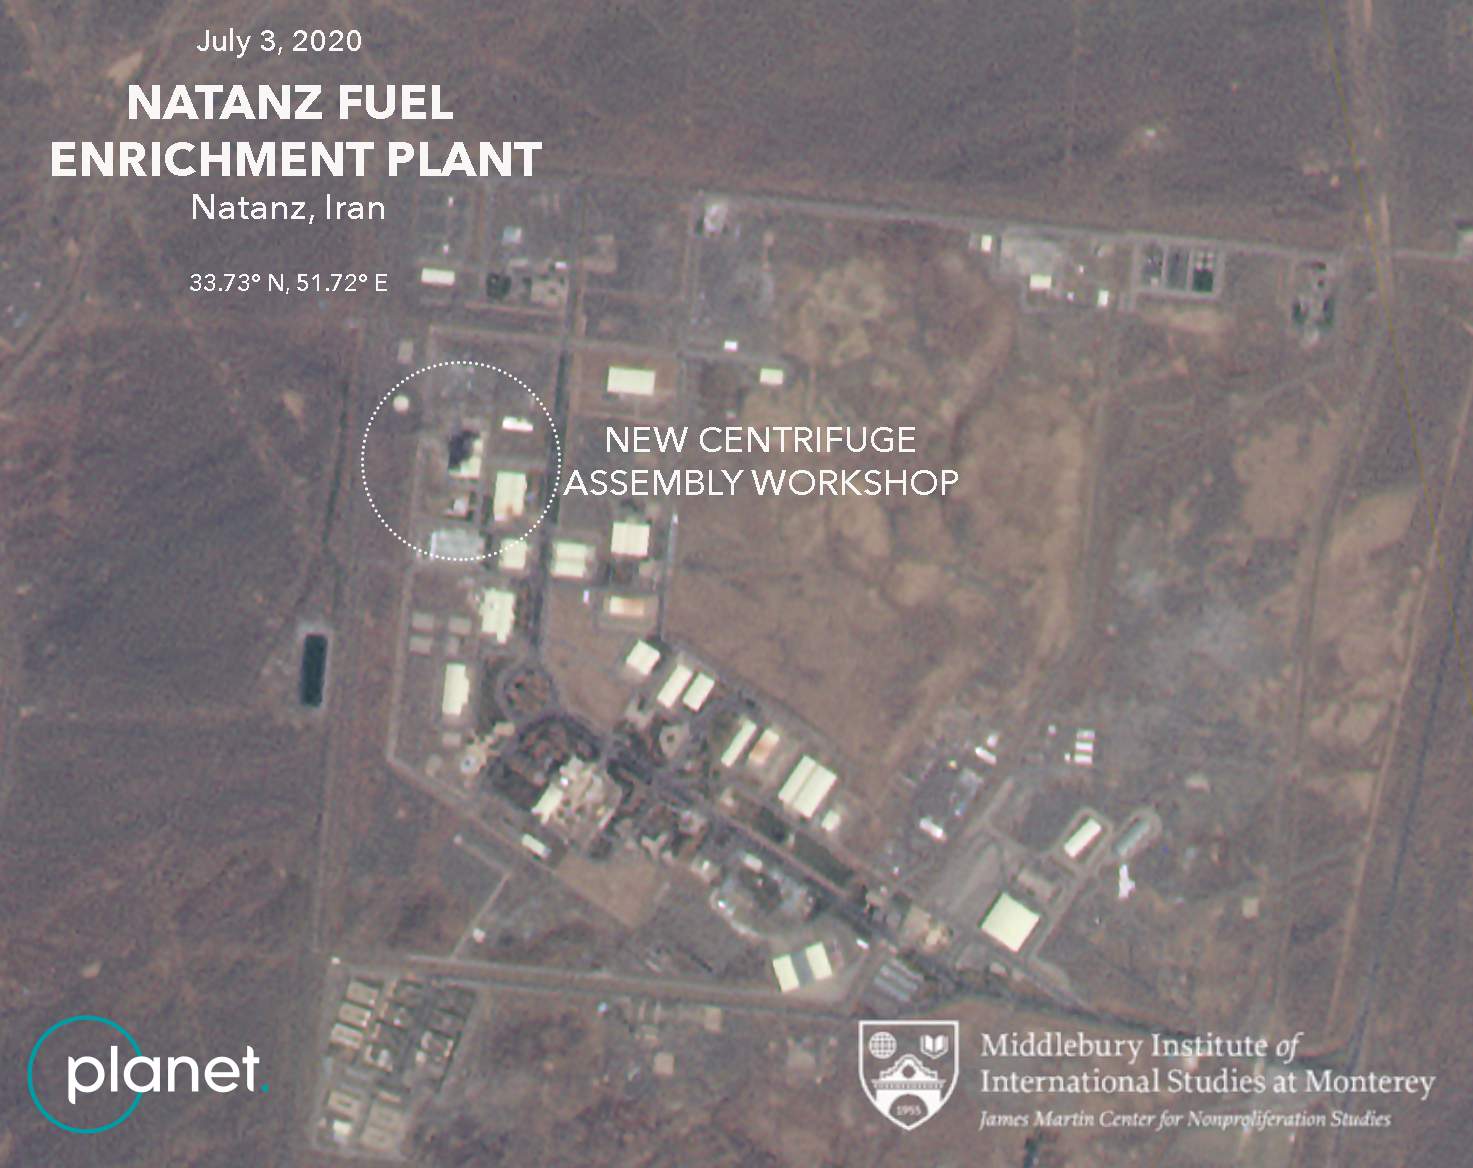 Messages claiming Iran nuclear site fire deepen mystery